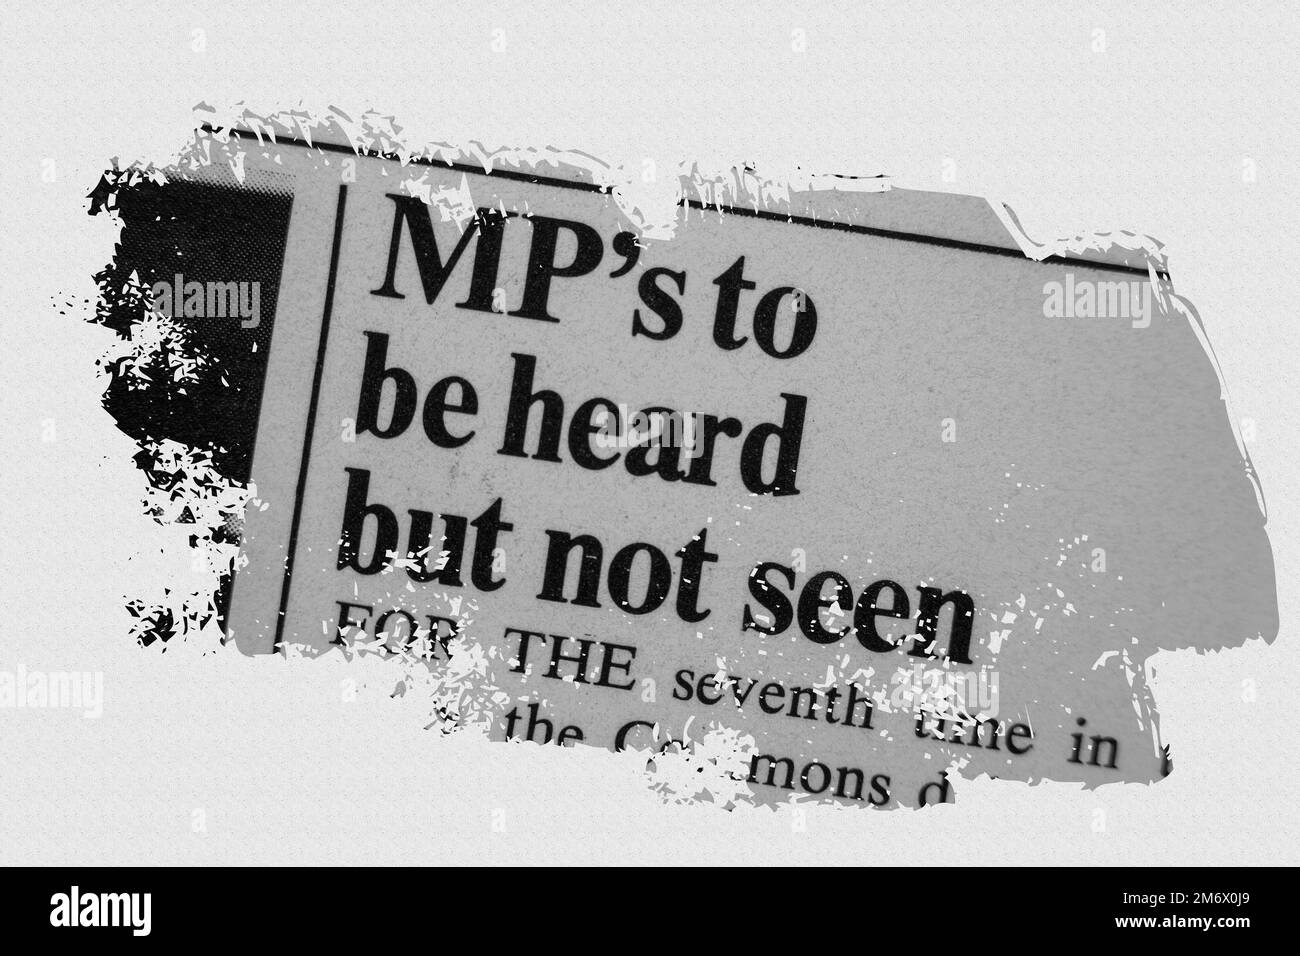 MP's to be heard but not seen - news story from 1975 newspaper headline article title with overlay Stock Photo